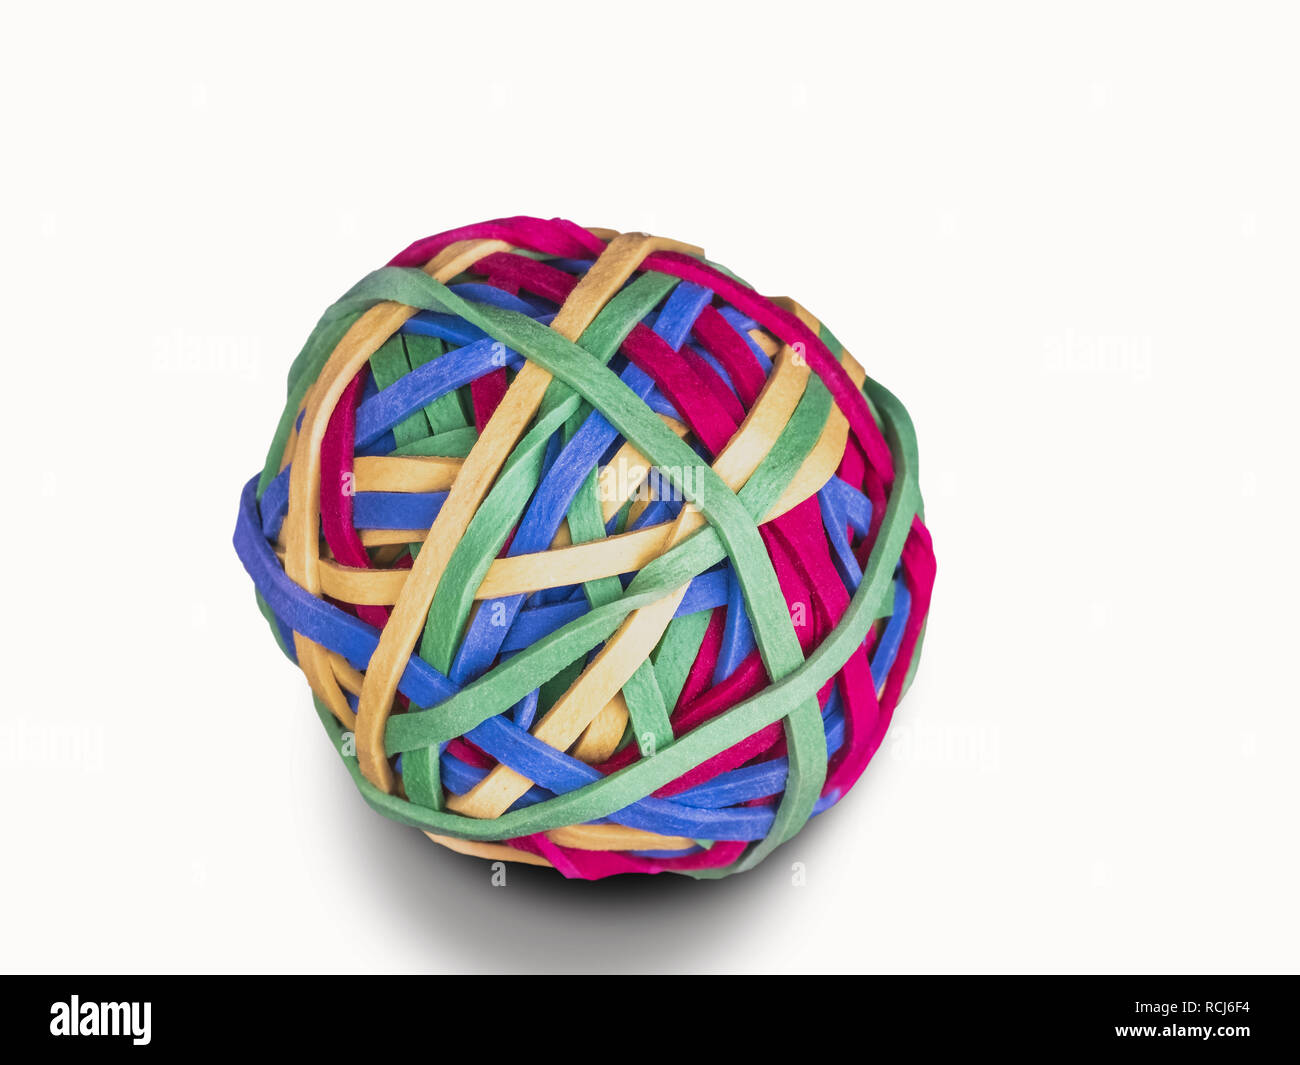 Ball of rubber bands, white background Stock Photo